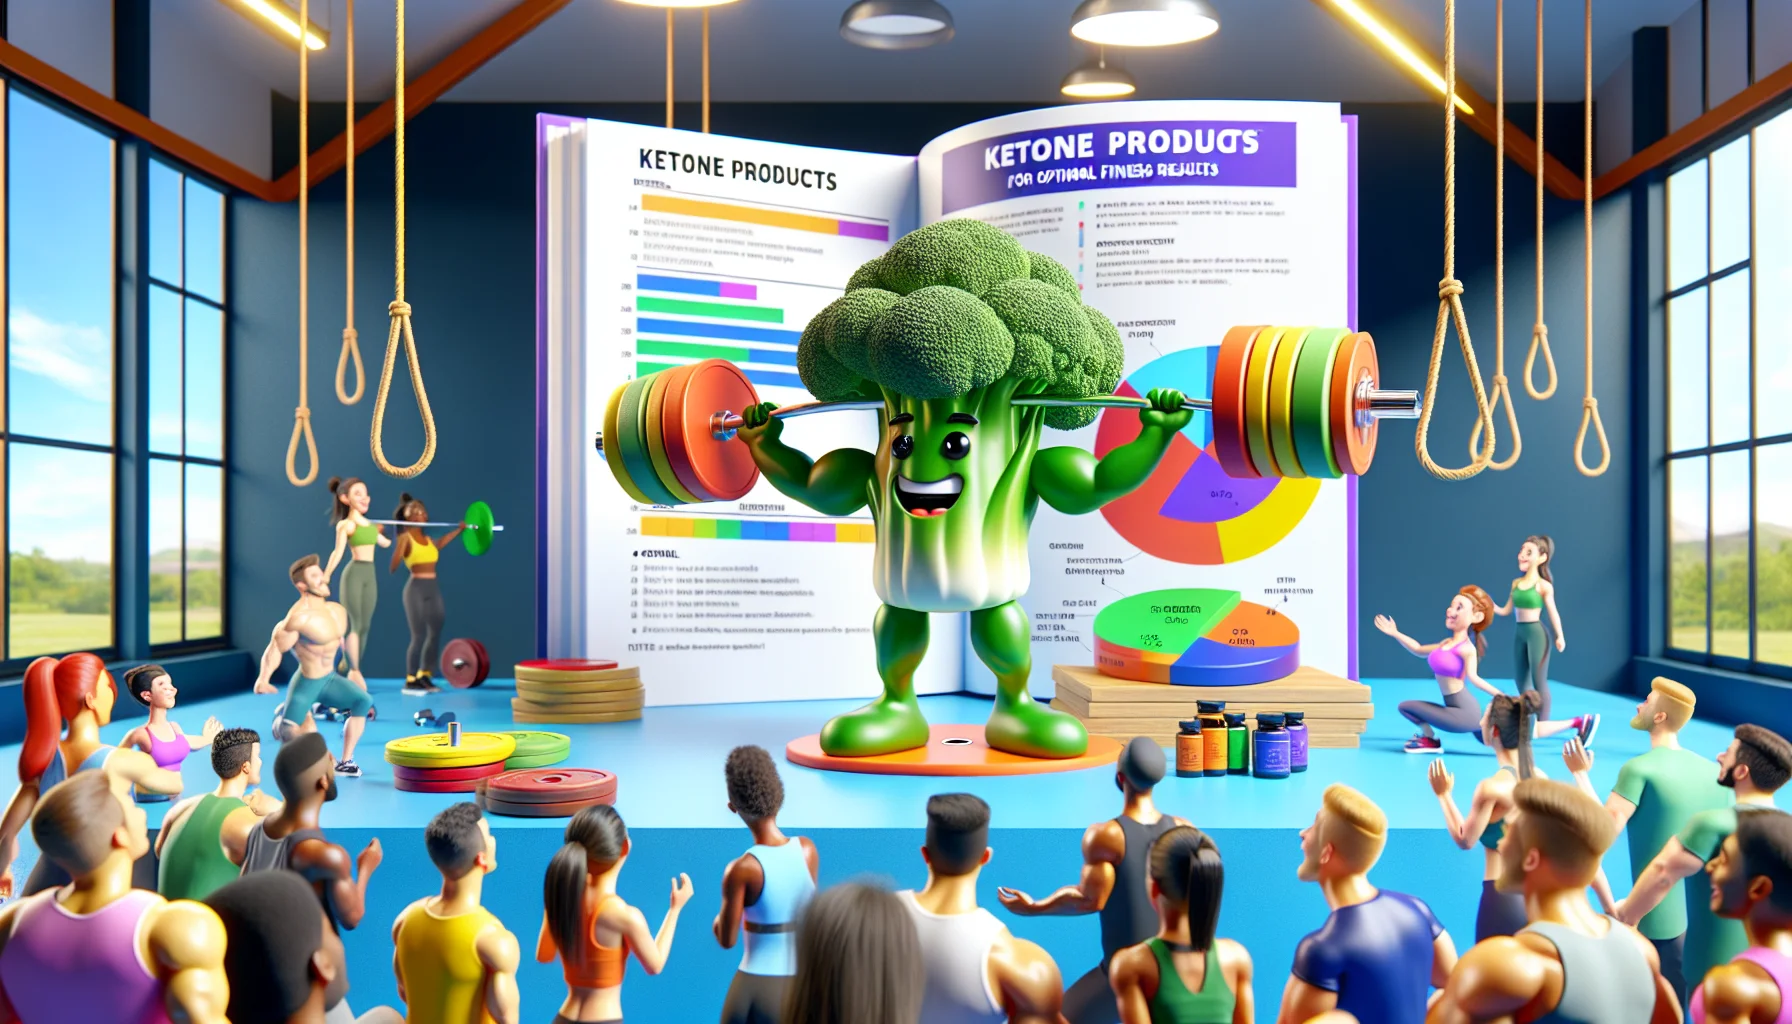 Visualize an amusing and engaging scene displaying a Ketone Products Dosage Guide for Optimal Fitness Results. The foreground hosts a comical humanoid broccoli character energetically engaging in exercise, perhaps lifting a barbell made of healthy veggies. In the near background, a prominently visible manual, richly detailed with colorful bar charts, pie diagrams, and dosage instructions related to ketone products catches attention. To add a touch of realism, include onlookers of diverse descents and genders, all reacting with surprised expressions. The scene is set in a vibrant health and fitness environment.